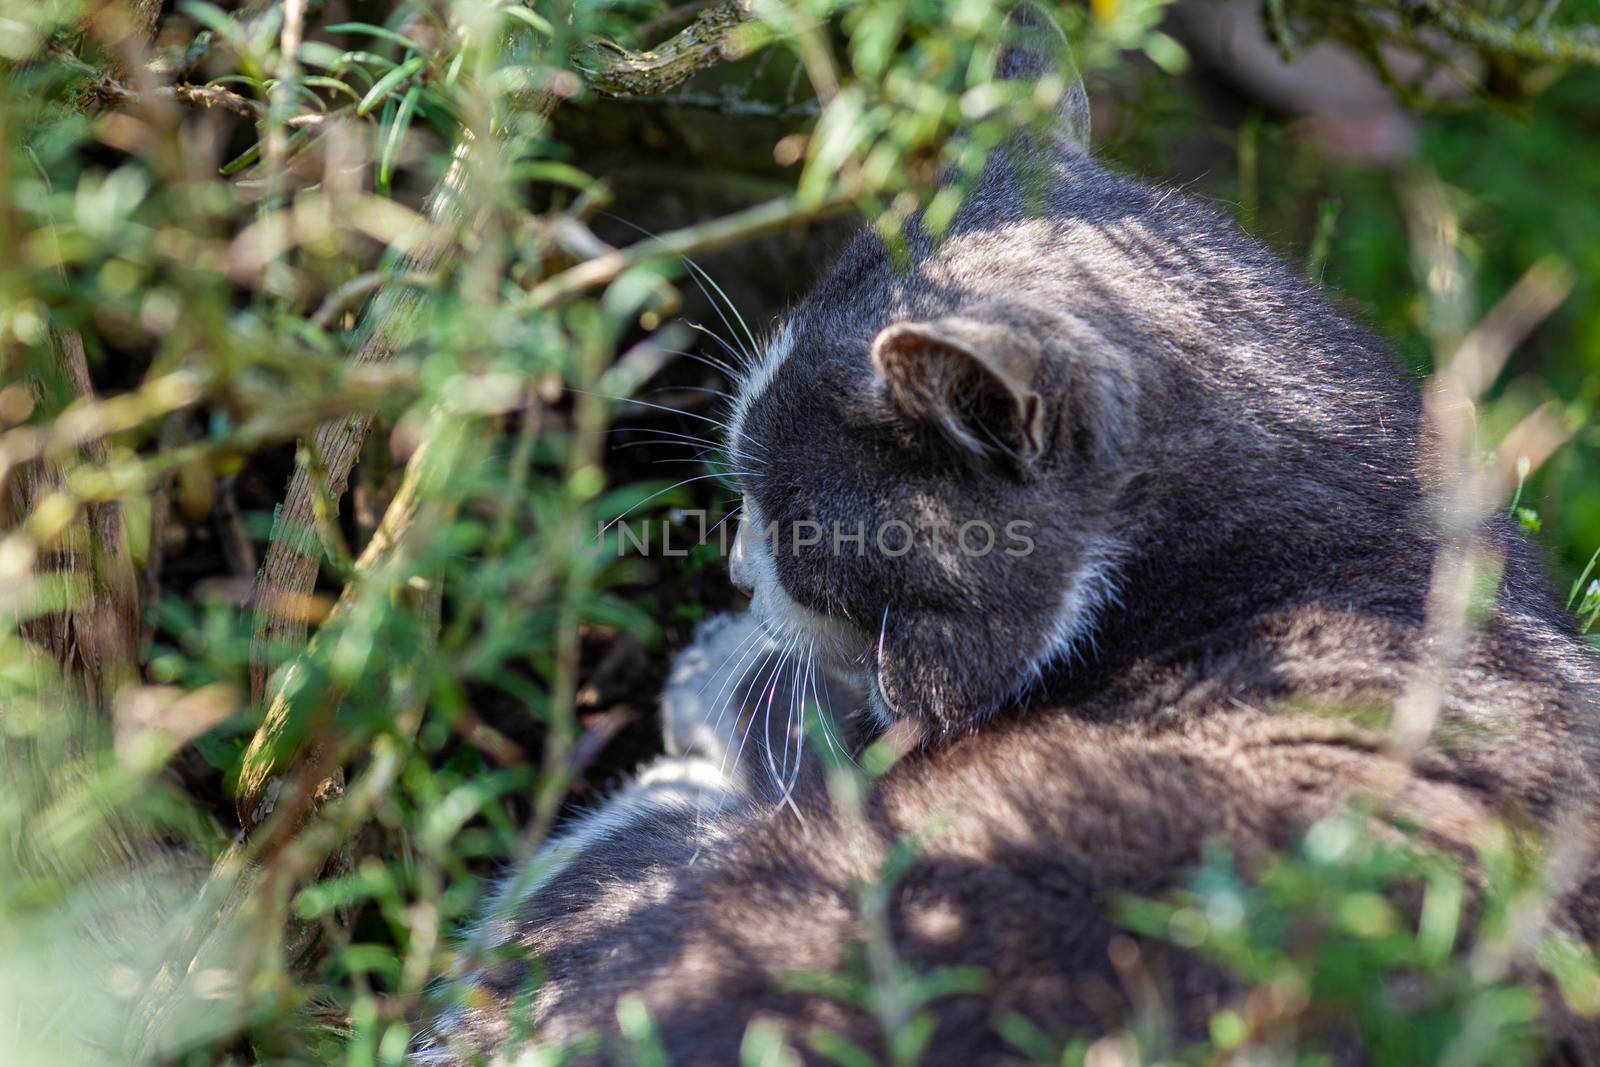 Cute cat sleeps nestled among the plants 2 by pippocarlot